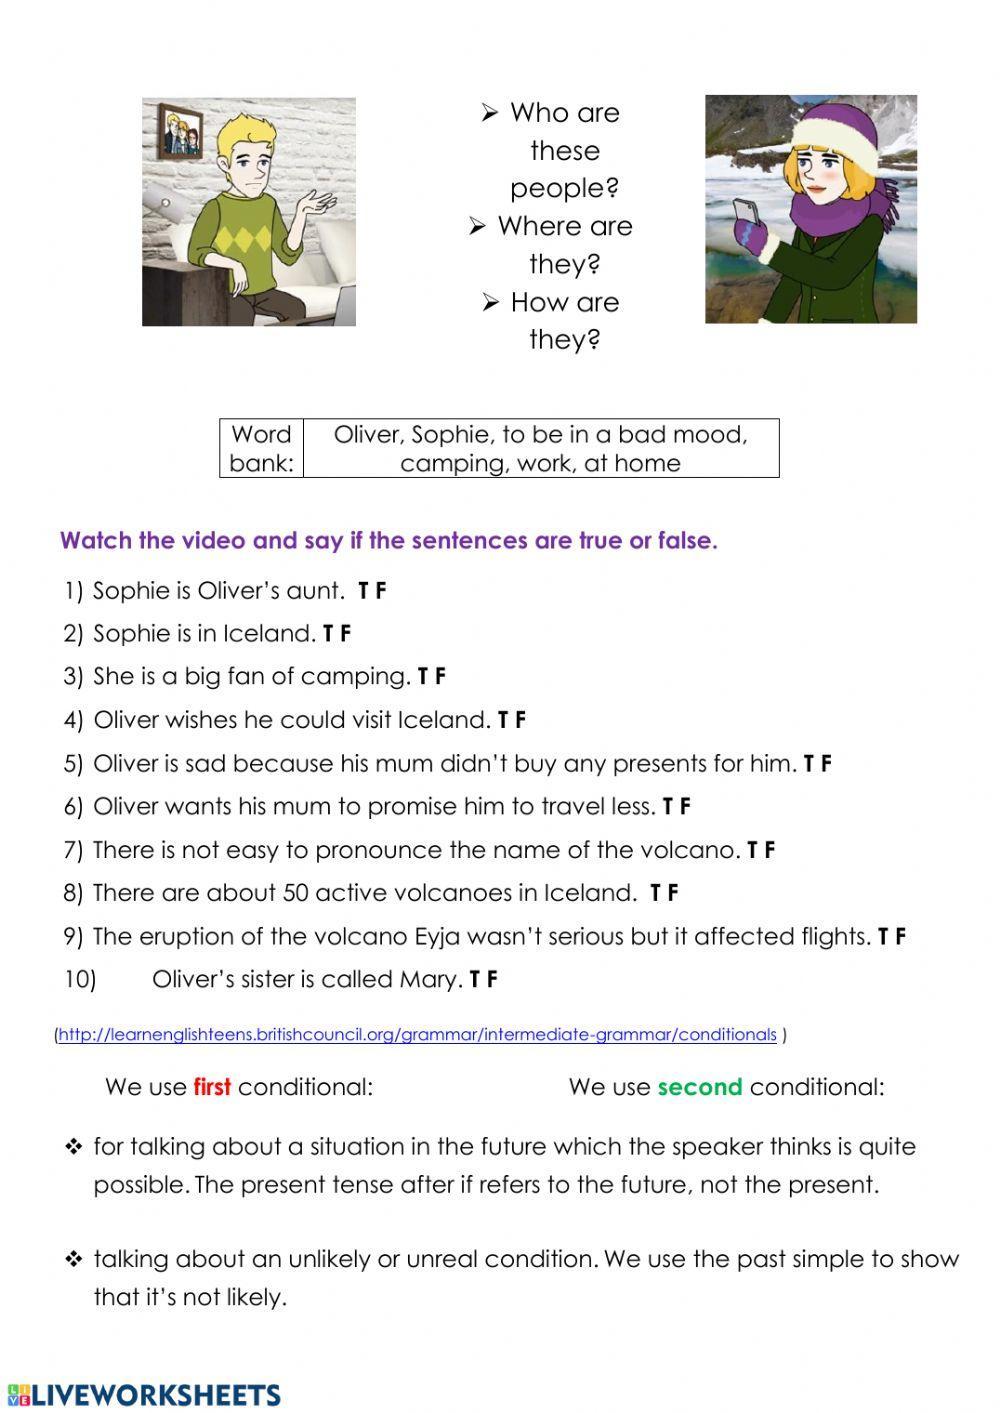 Worksheet Video first second conditional